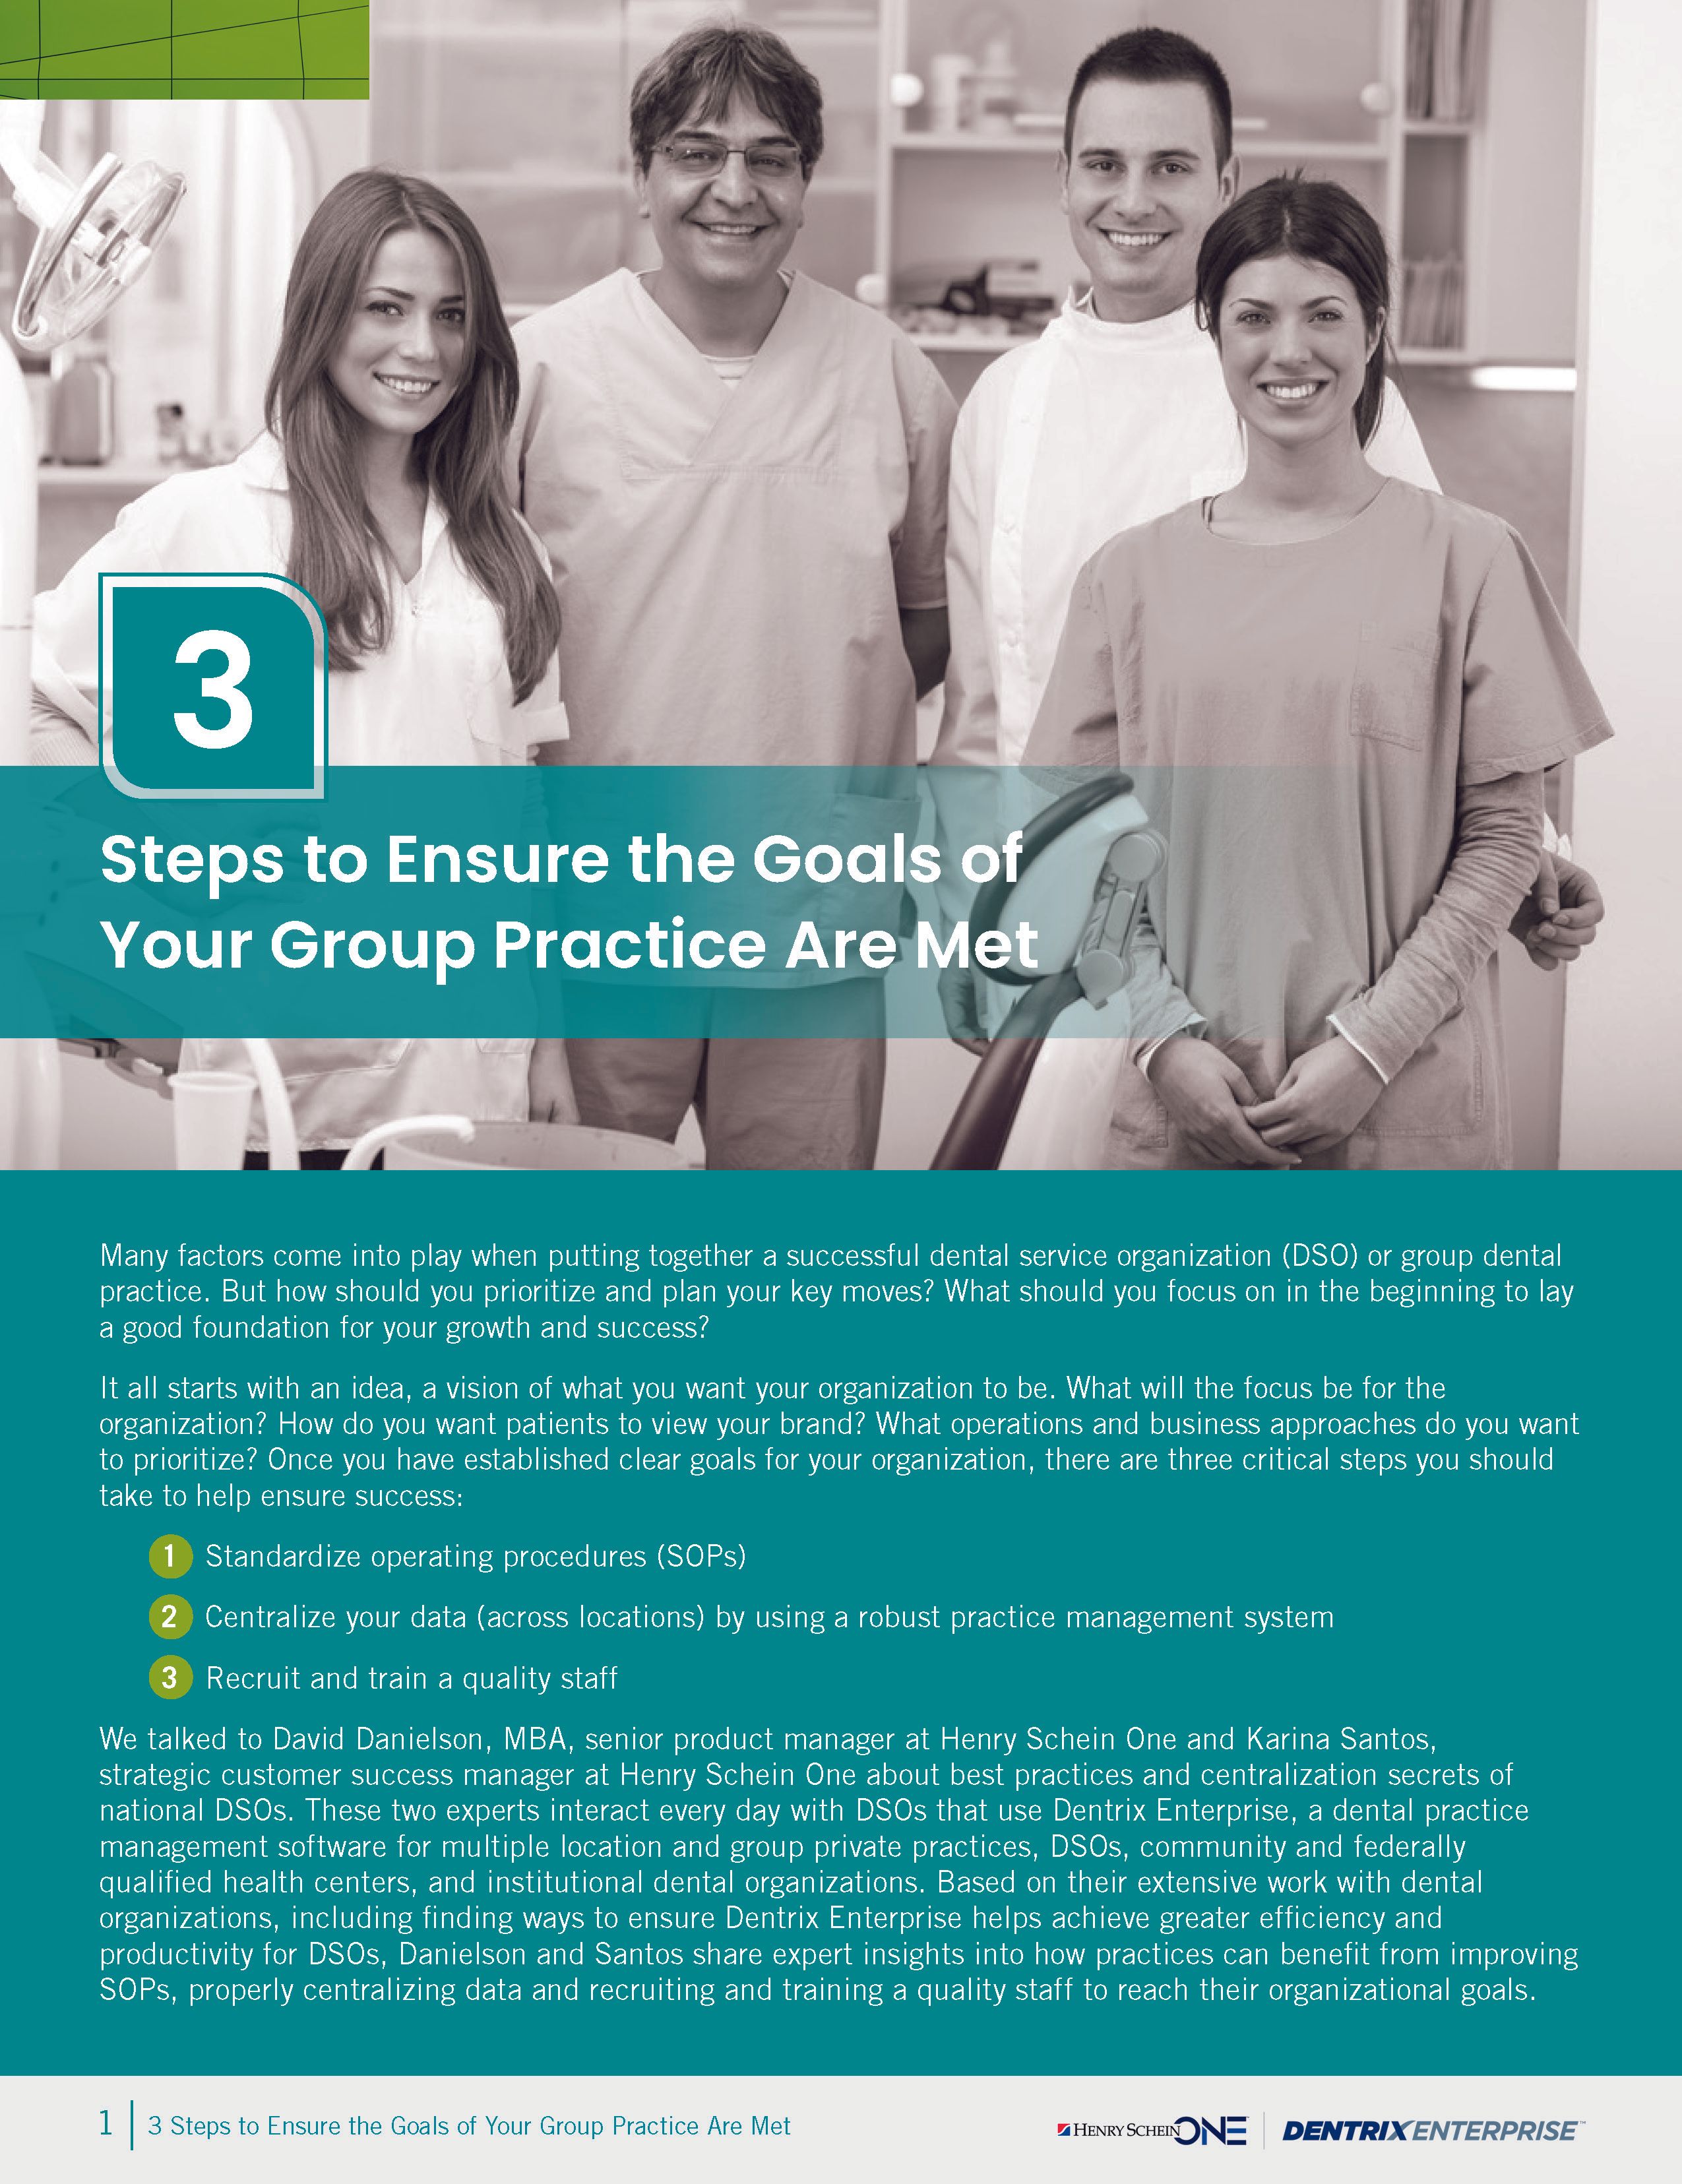 3 Steps to Ensure the Goals of Your Group Practice Are Met